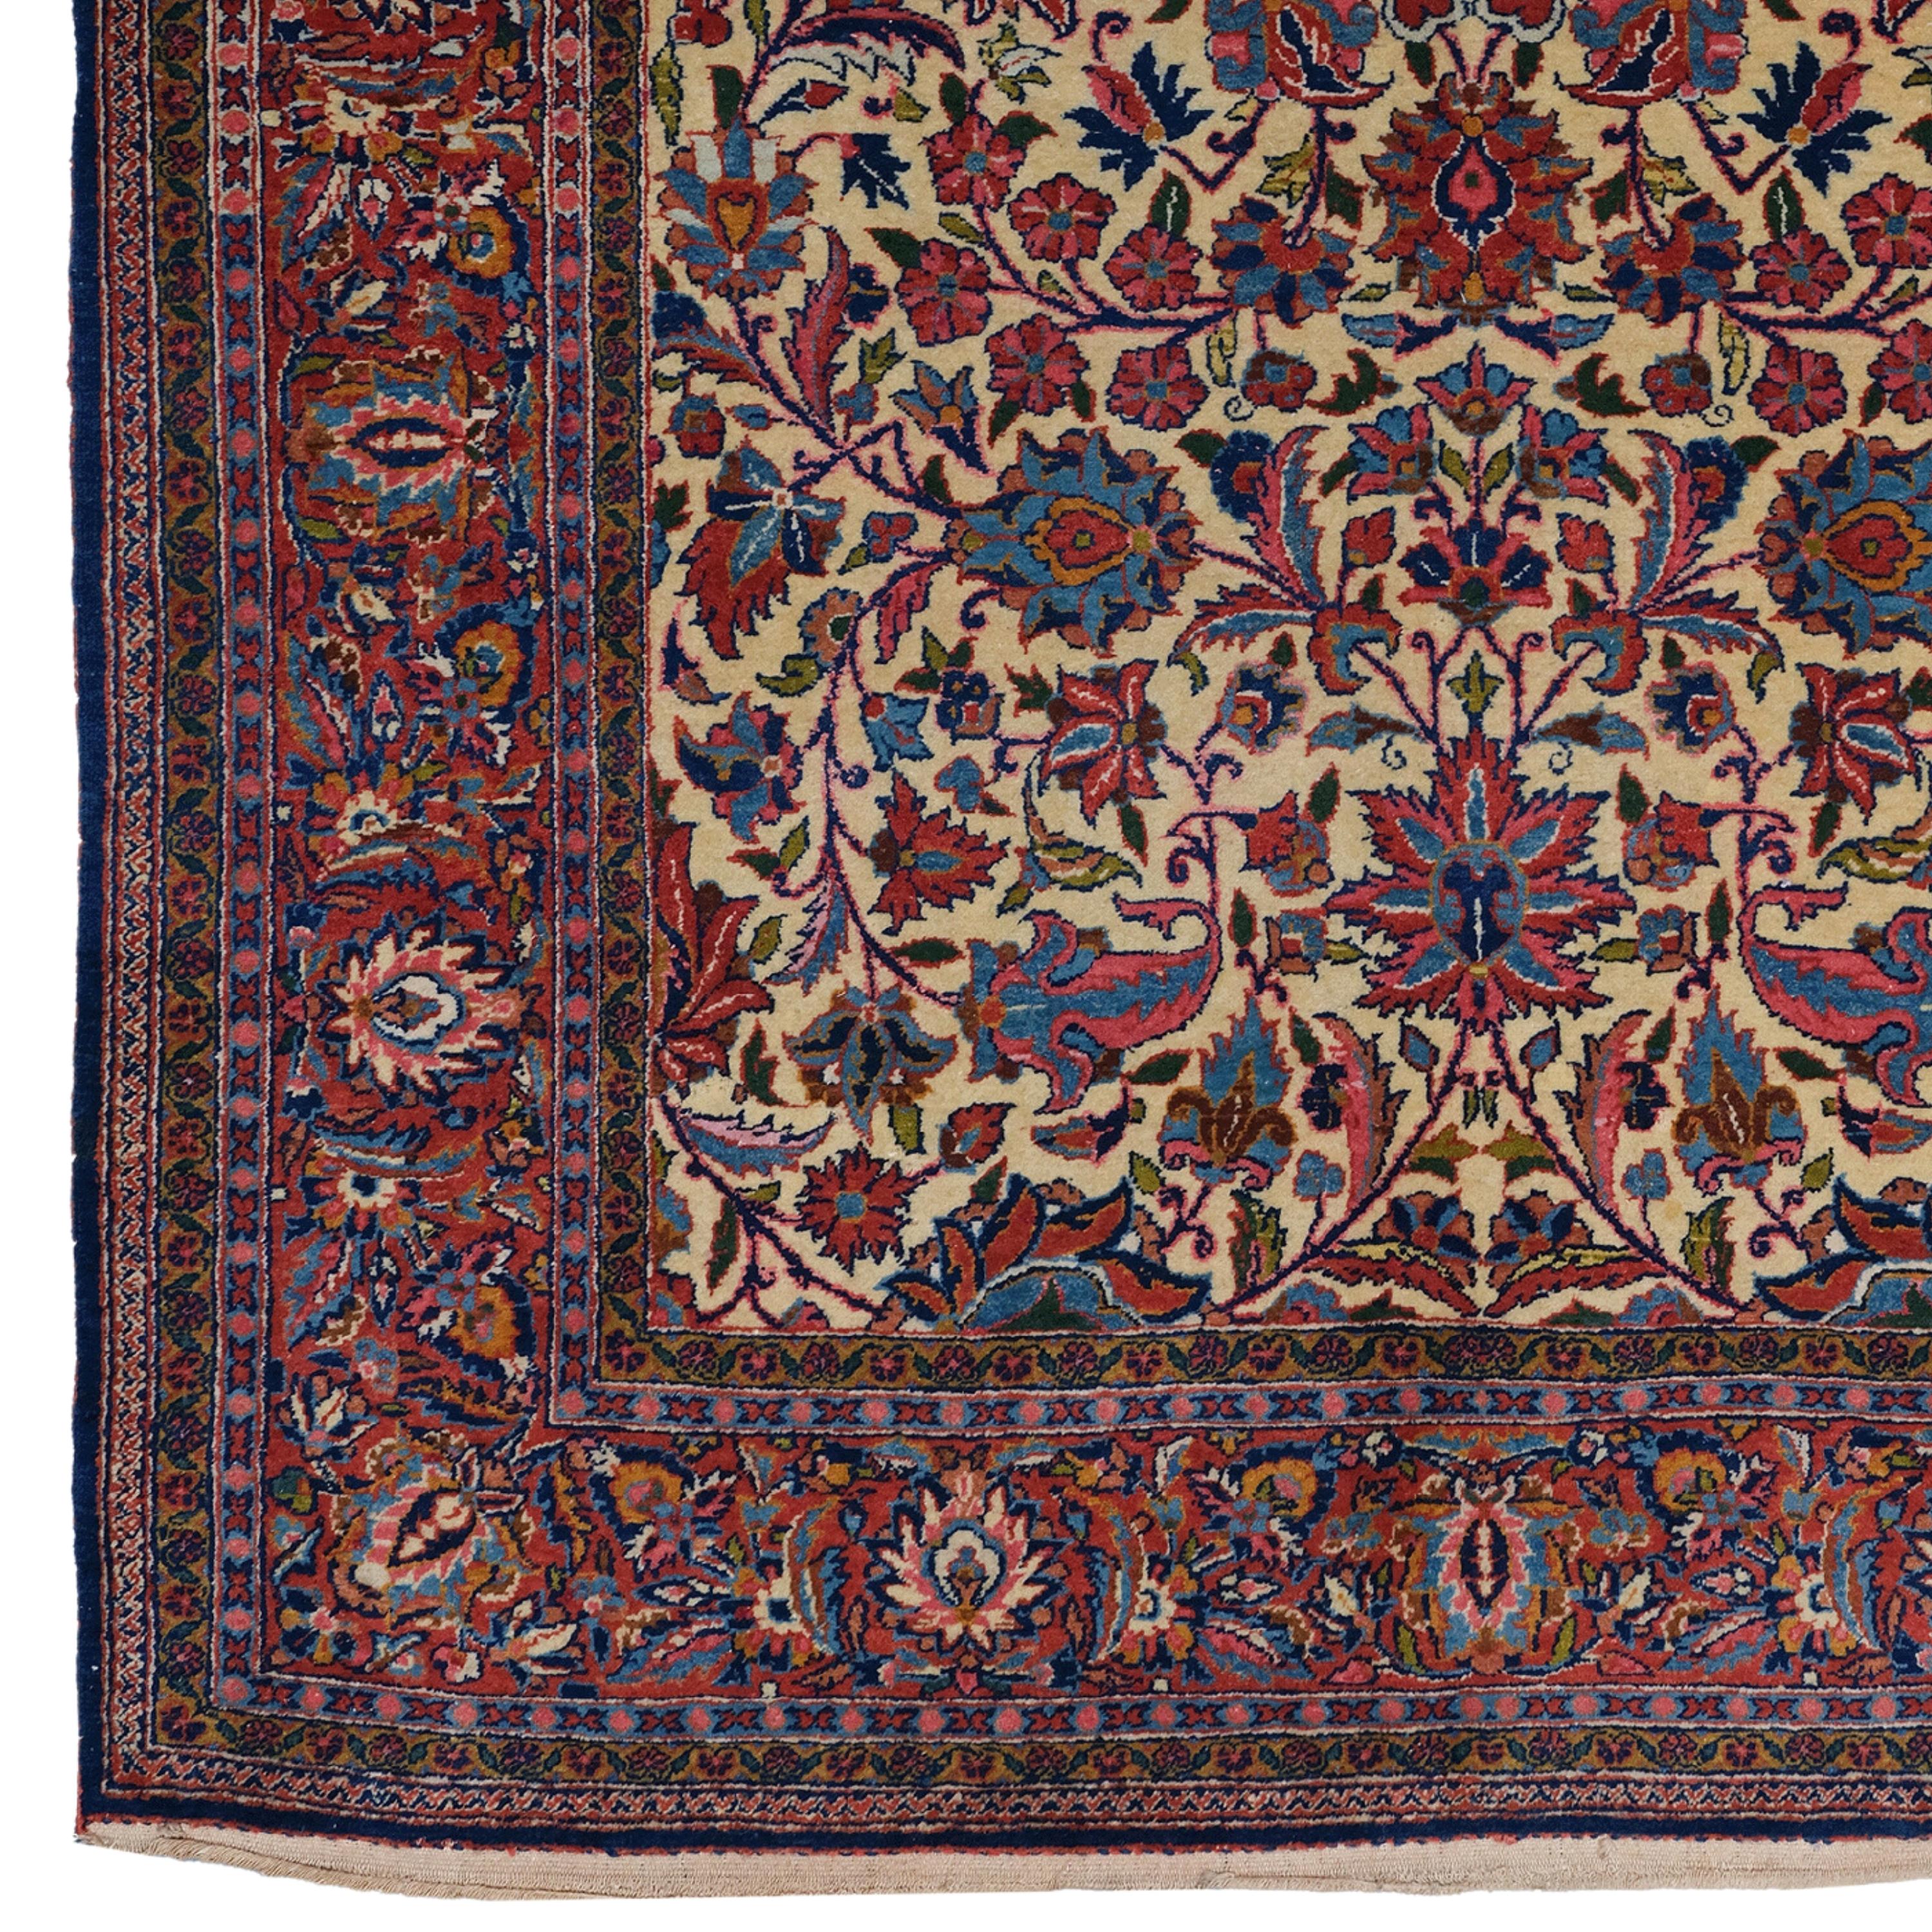 A Unique Piece of the 19th Century: Antique Keshan Carpet

This elegant 19th-century Keshan rug is a work of art that can enchant any space with its carefully woven details and rich color palette. Traditional motifs embroidered on a red background